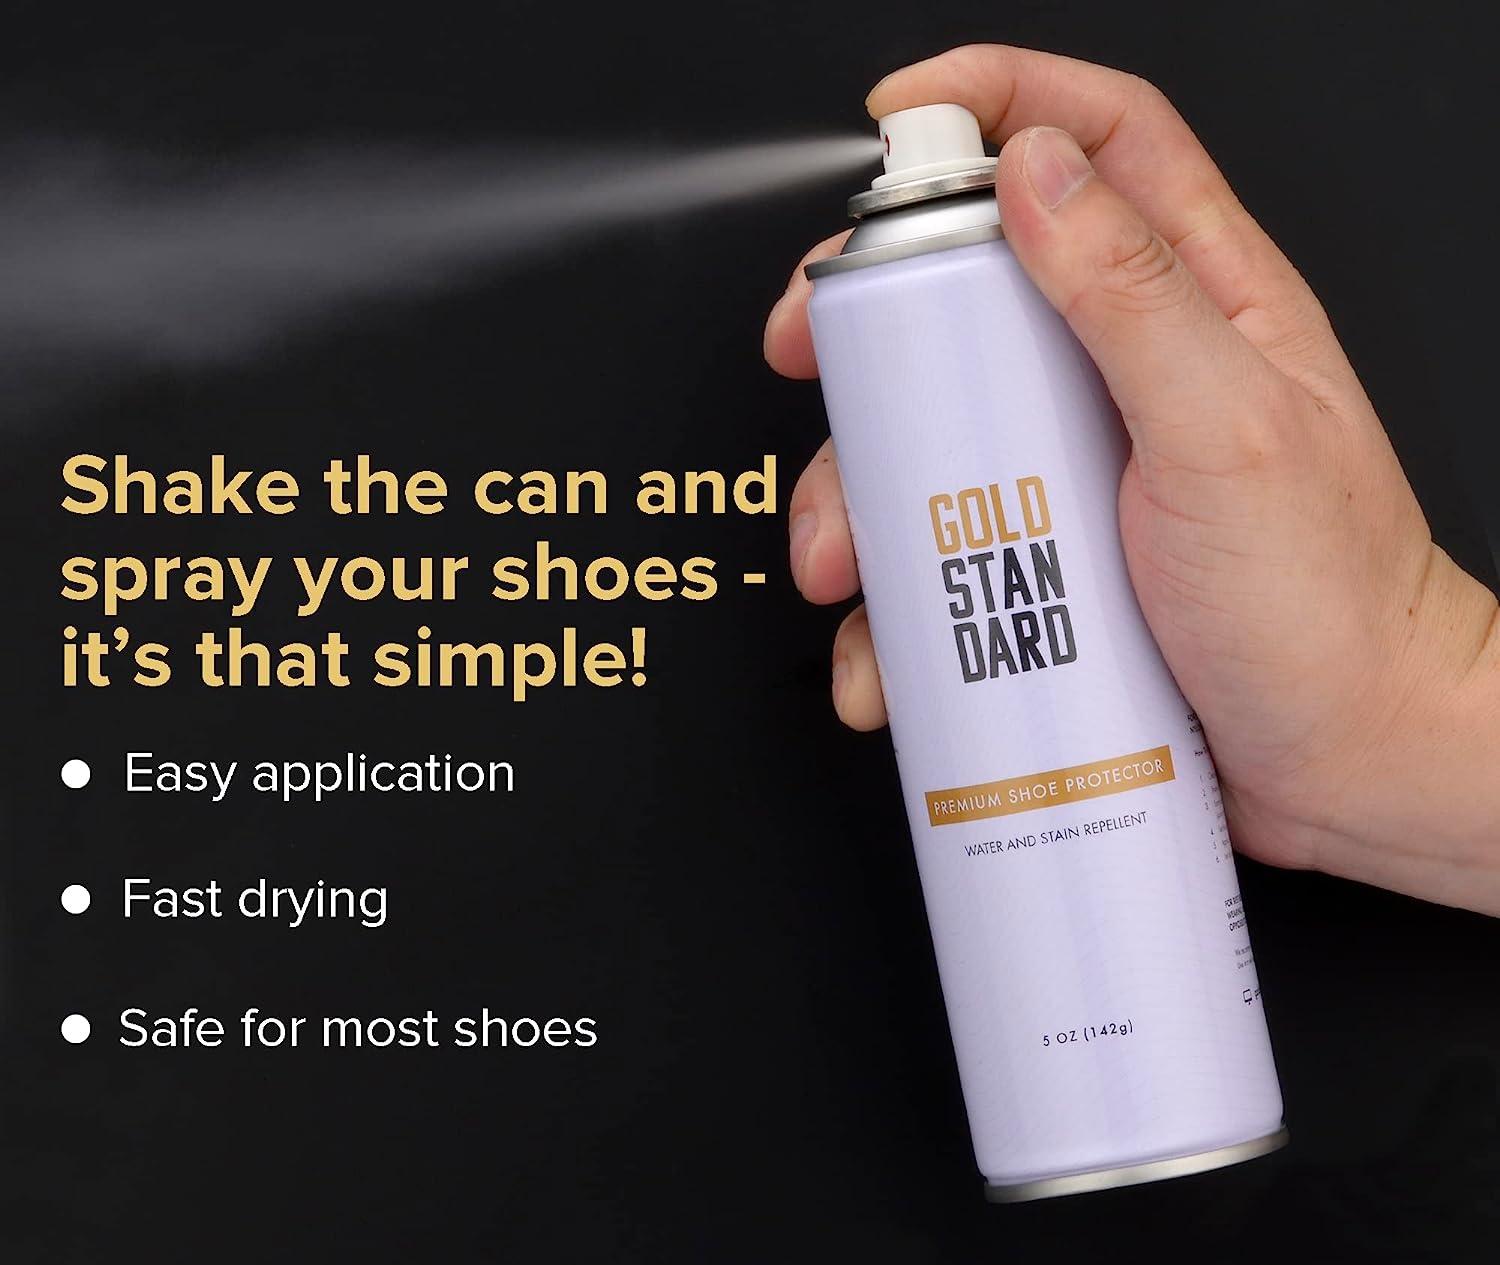 Gold Standard Premium Water-Repellent Shoe Protector Spray 5 Oz. Suede Shoe  Protector Spray Waterproof Formula Repels Water and Stains - Leather,  Nubuck, Suede, Canvas, White Sneaker Protector Spray